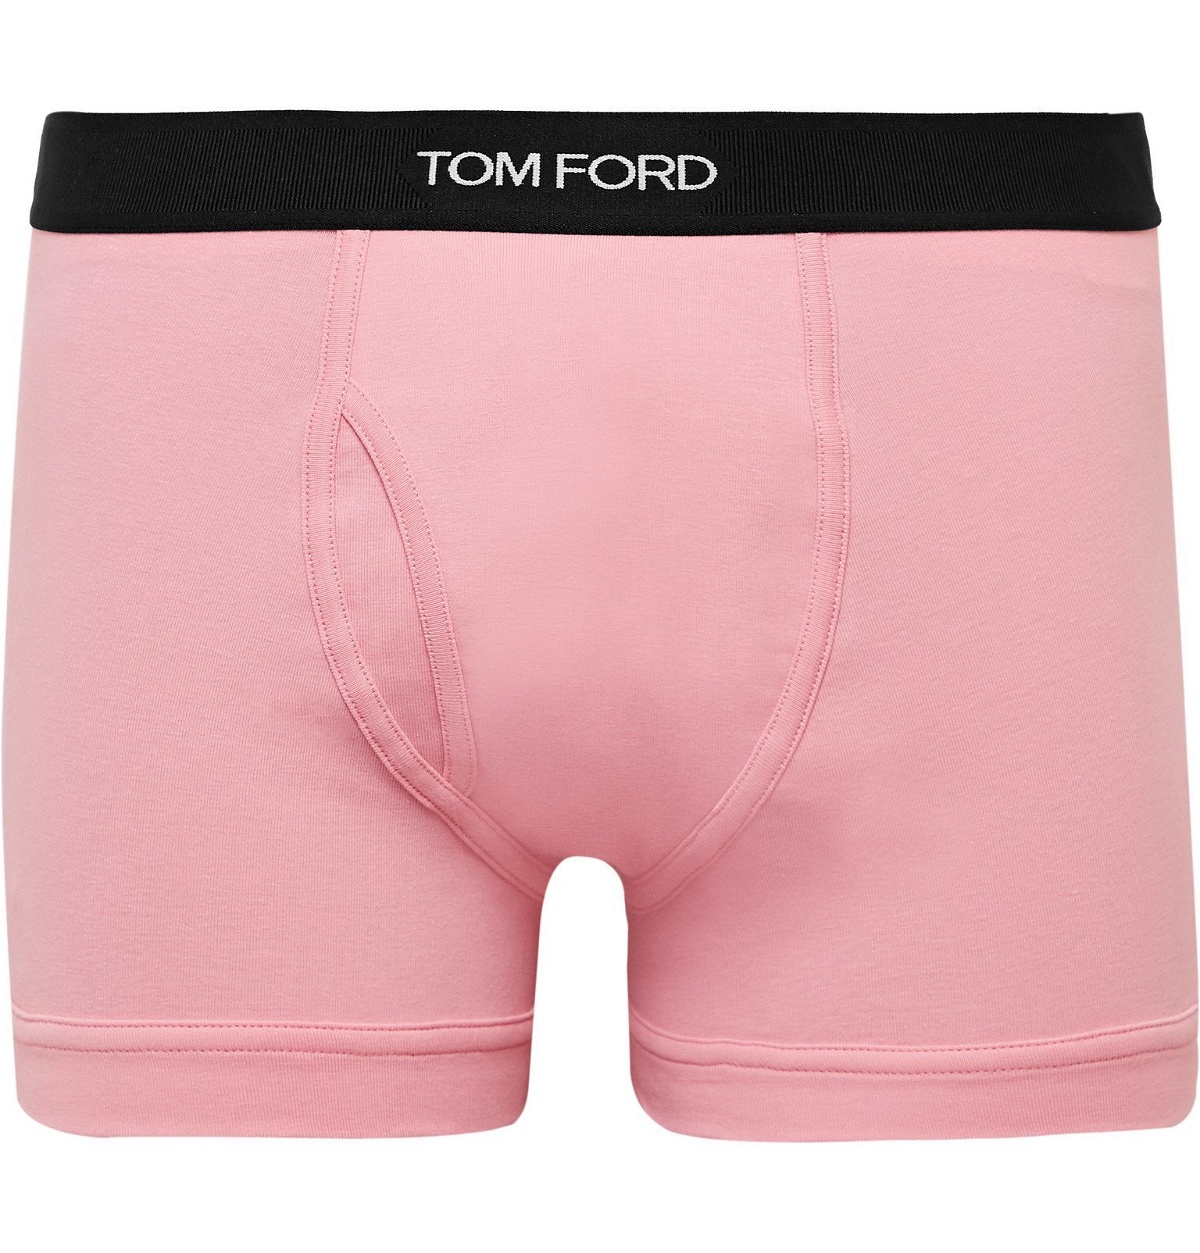 TOM FORD - Stretch-Cotton Boxer Briefs - Pink TOM FORD